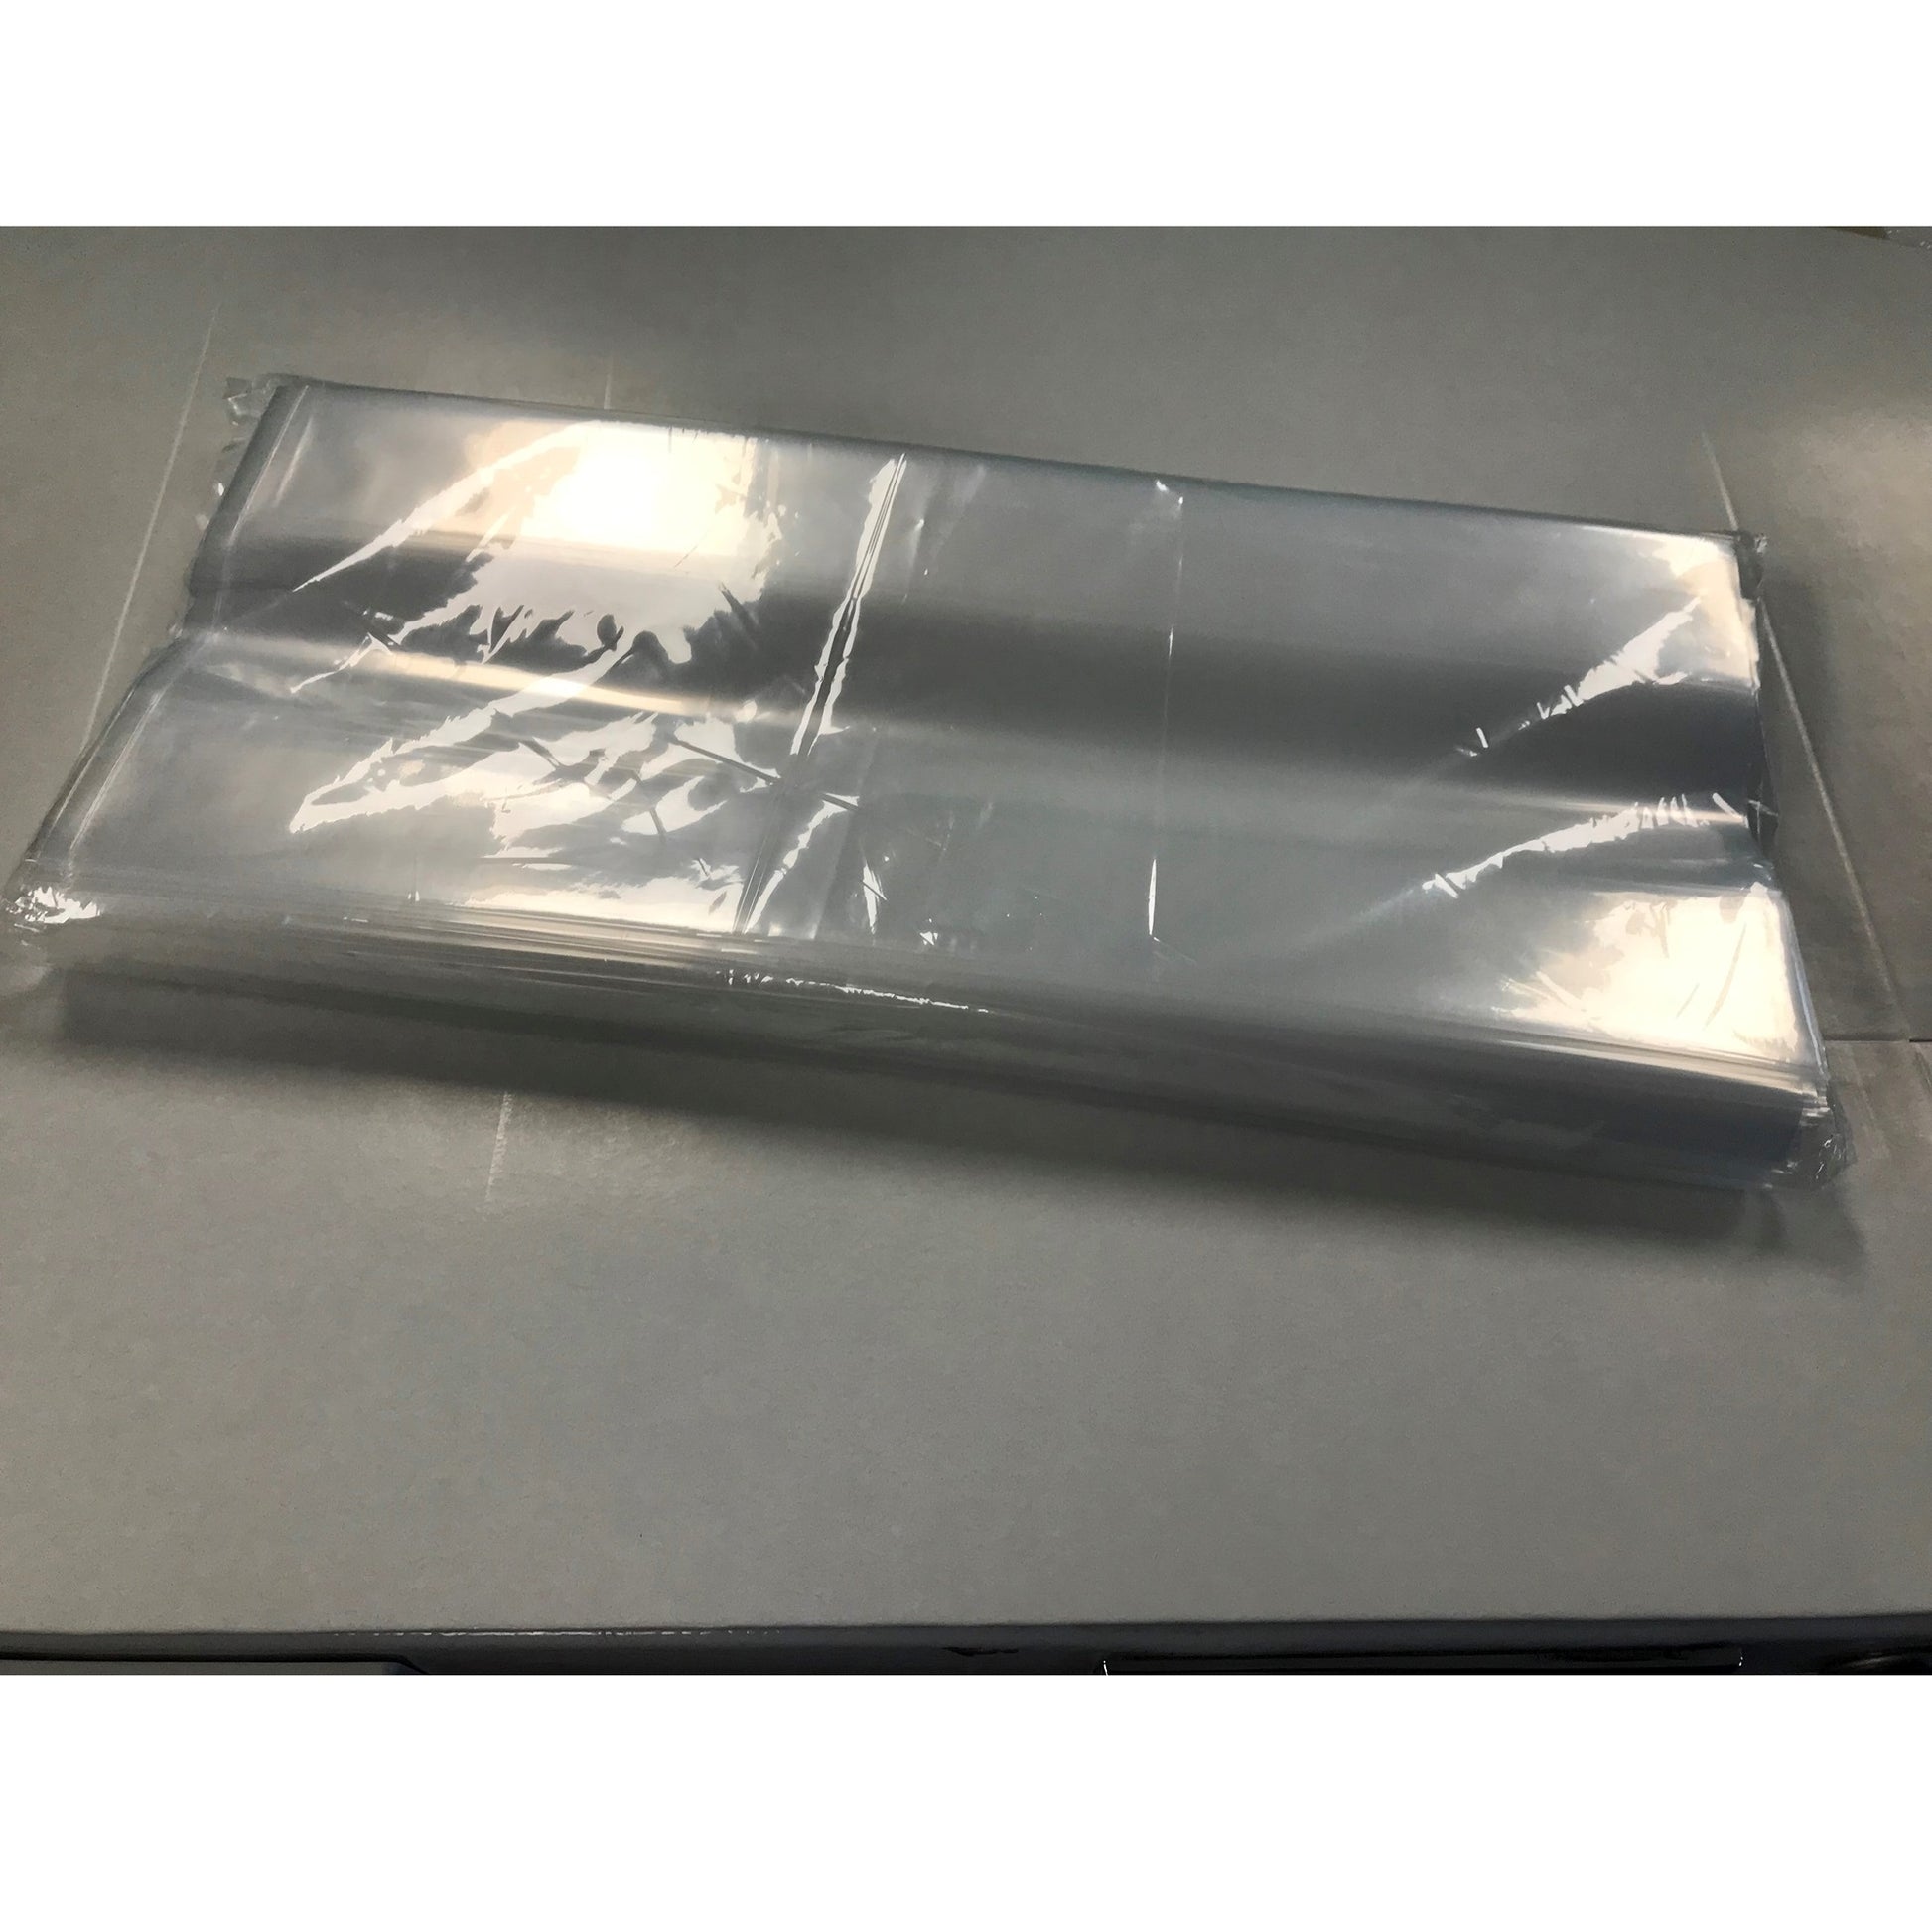 The photo displays a stack of clear poly bags with 5 x 3 x 12-inch dimensions. These 2 Mil gusseted bags have a shiny appearance,  suitable for a variety of packaging needs.